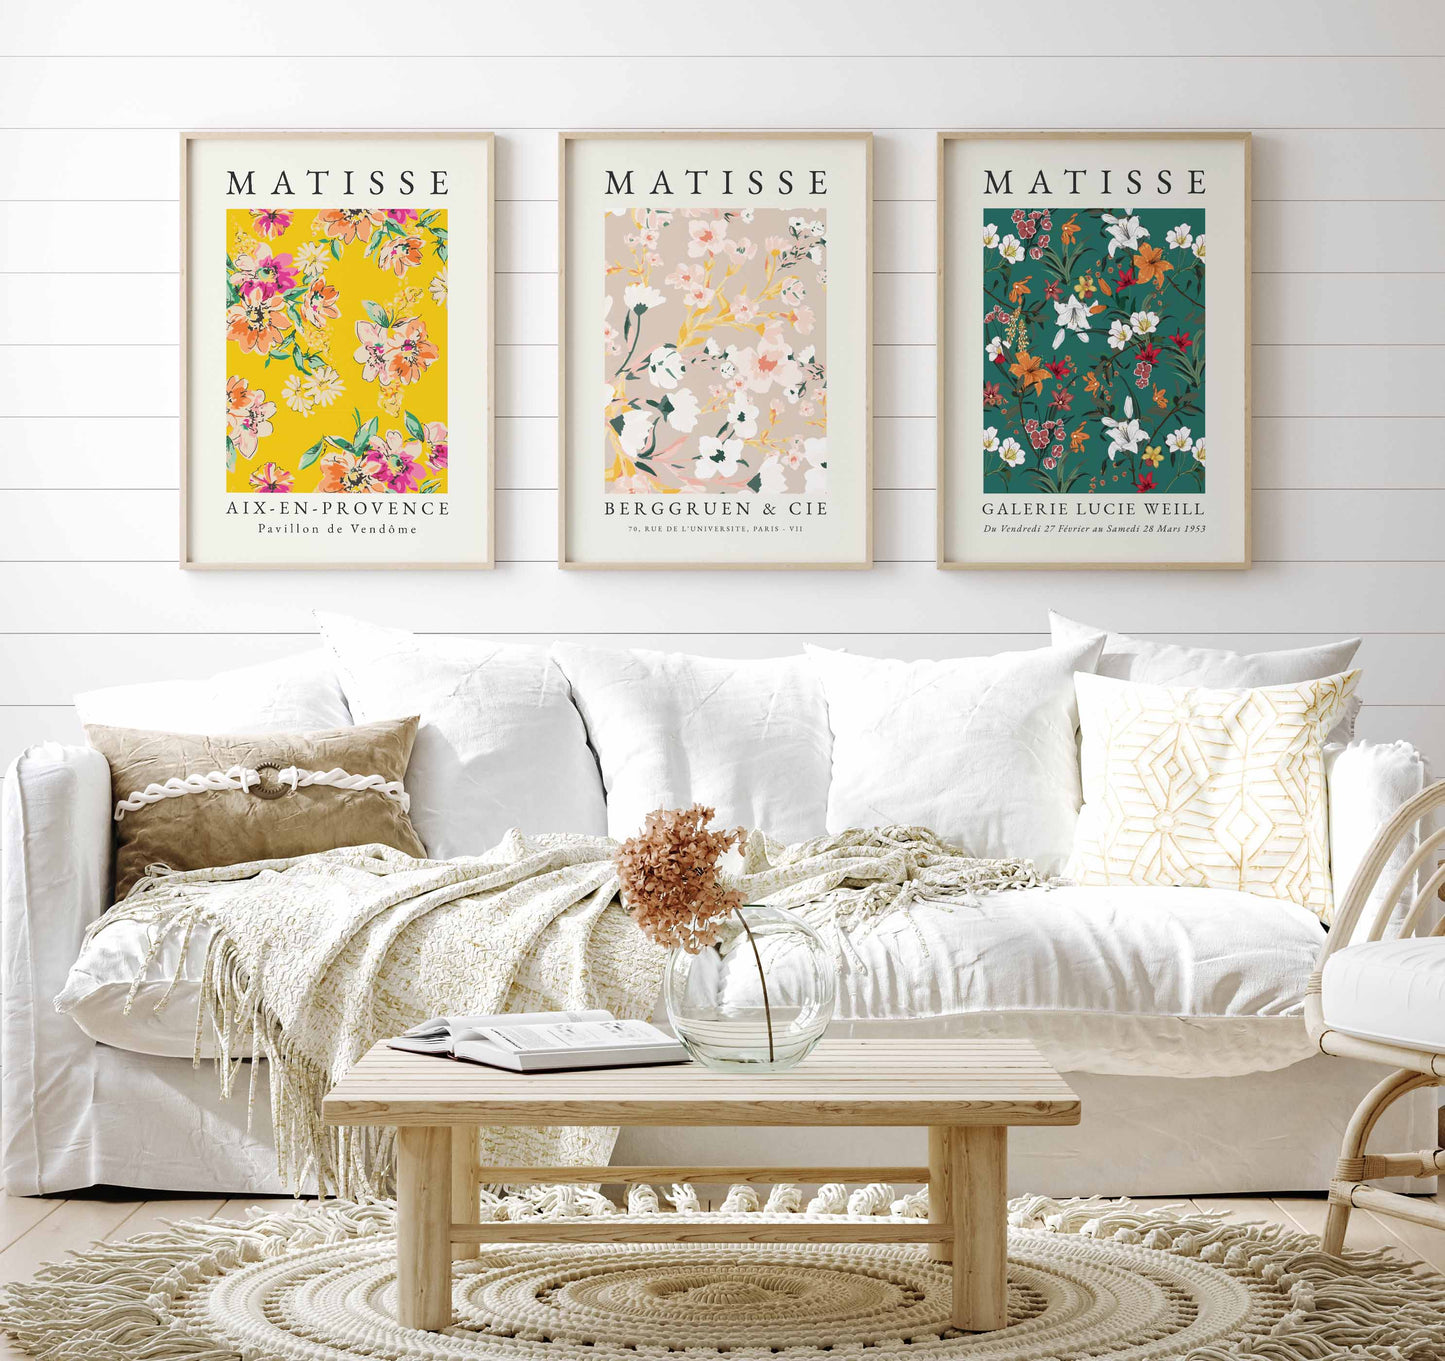 Set of 3 Matisse flower pattern prints, in yellow, pink and green